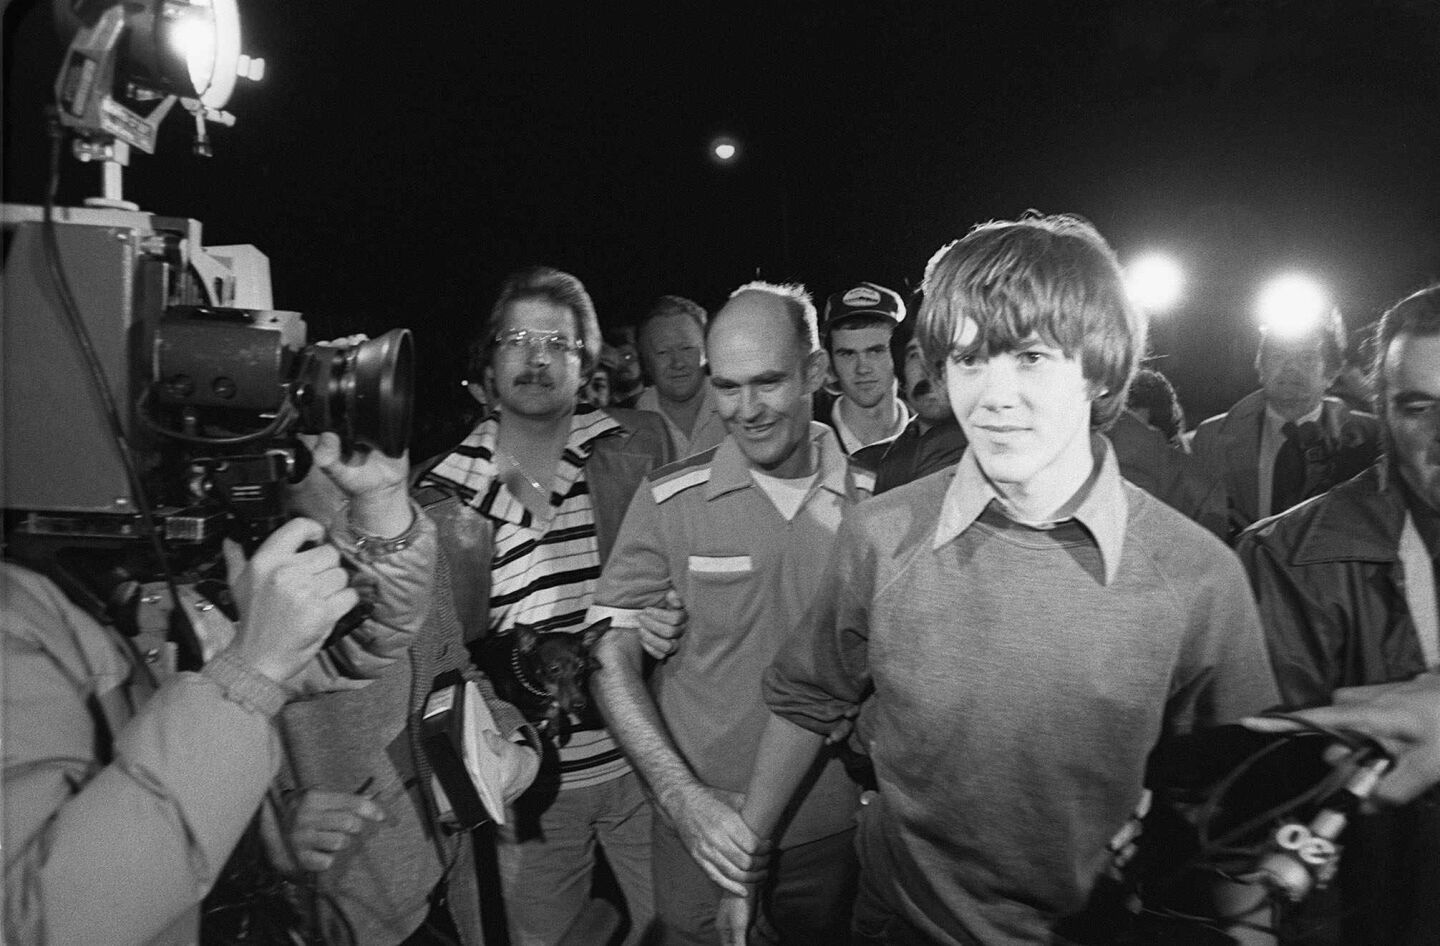 Steven Stayner, right, and and his brother Delbert Stayner walk toward their Merced County home as Steven was reunited with his family following a 7-year kidnap ordeal.